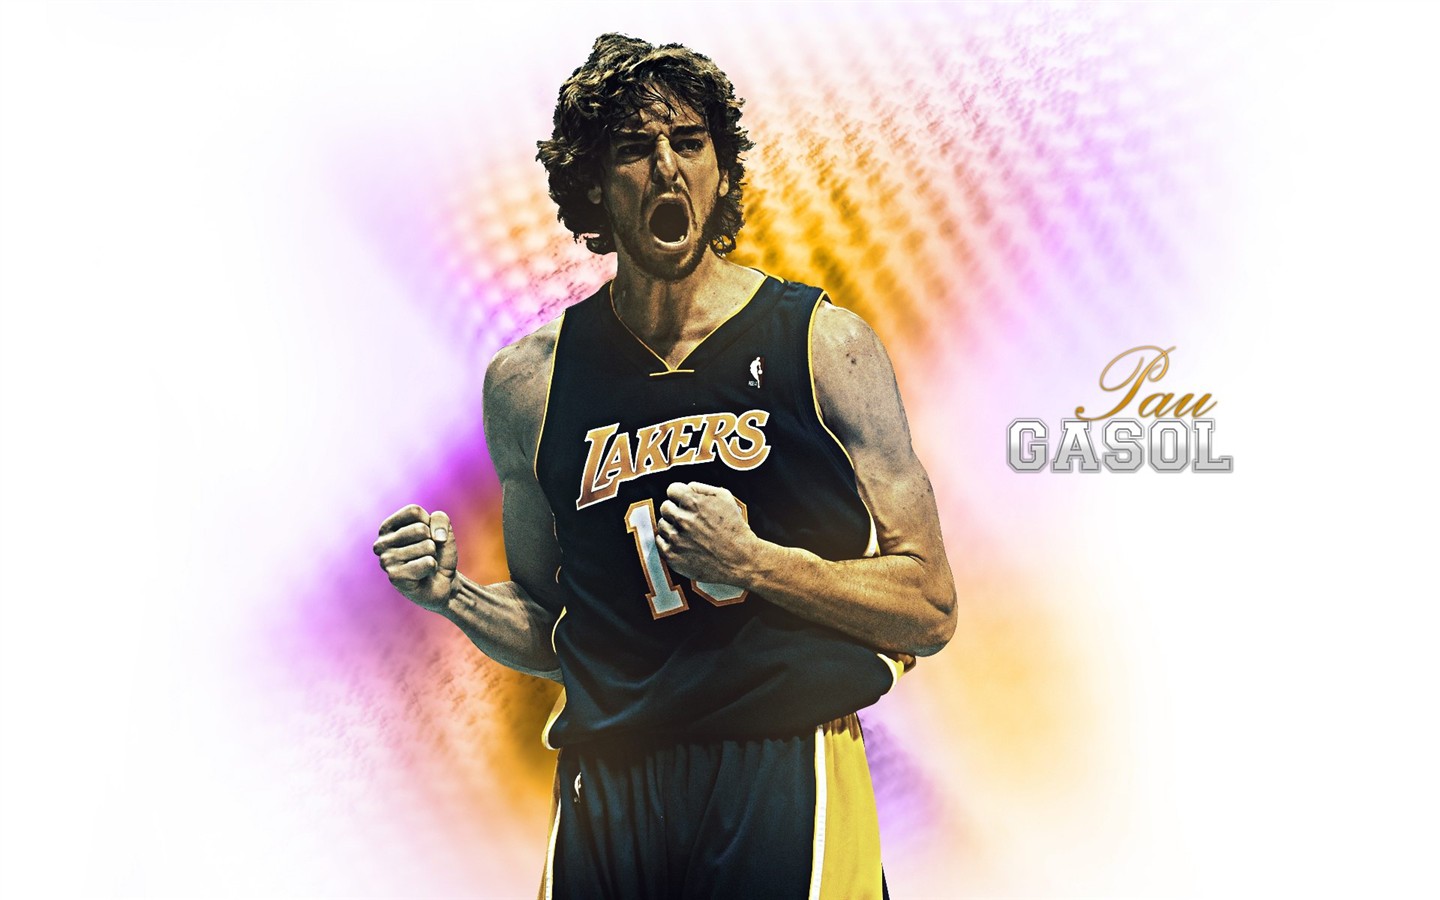 Los Angeles Lakers Wallpaper Oficial #21 - 1440x900